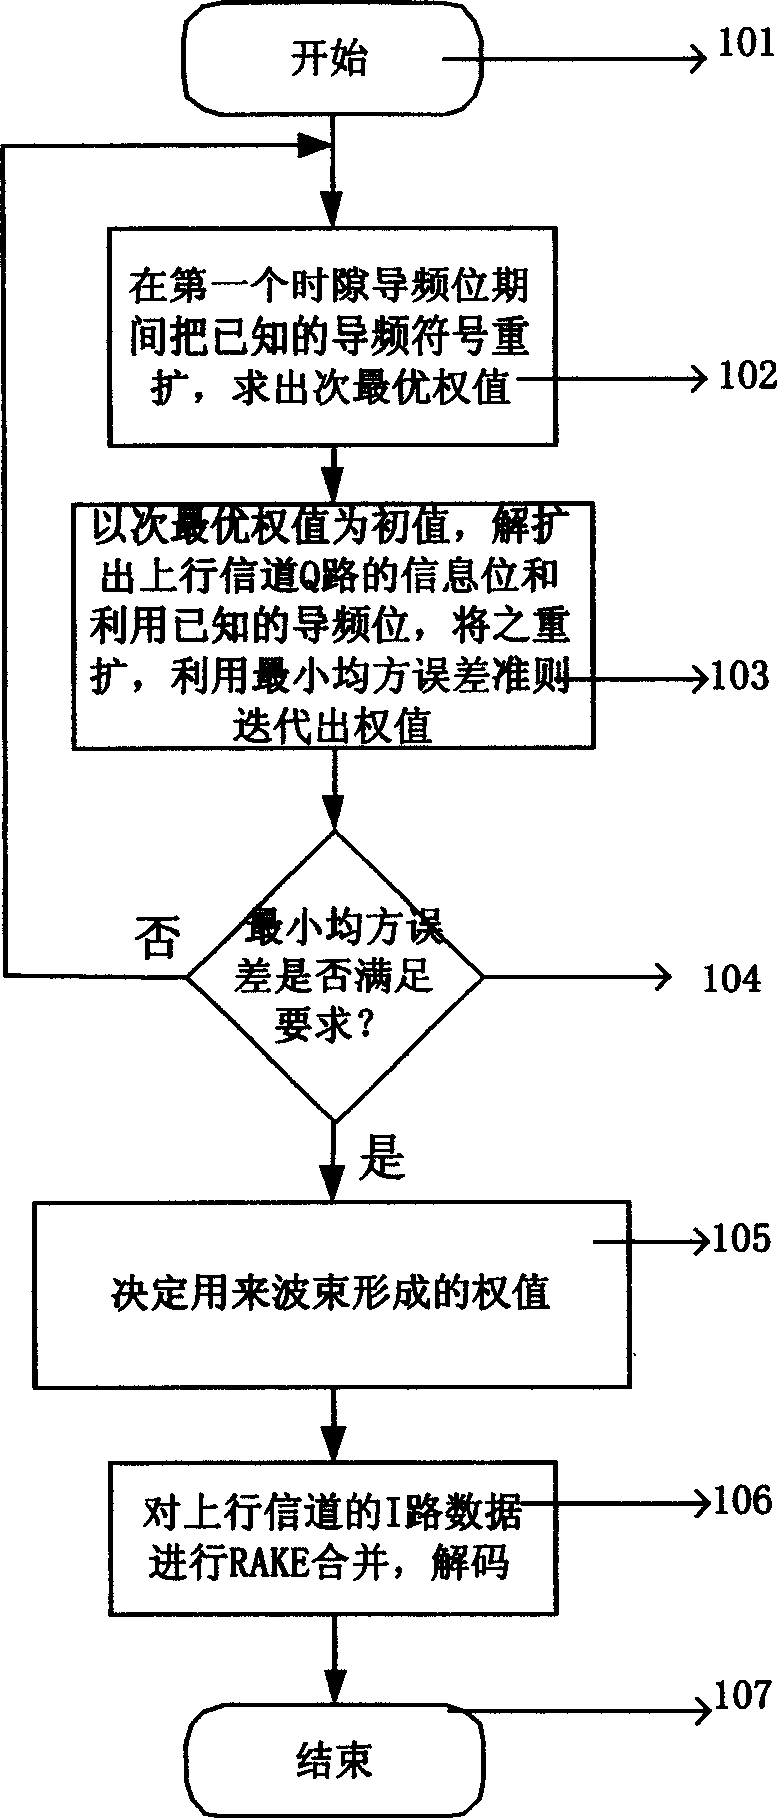 Beam forming method adapted to wide band CDMA system